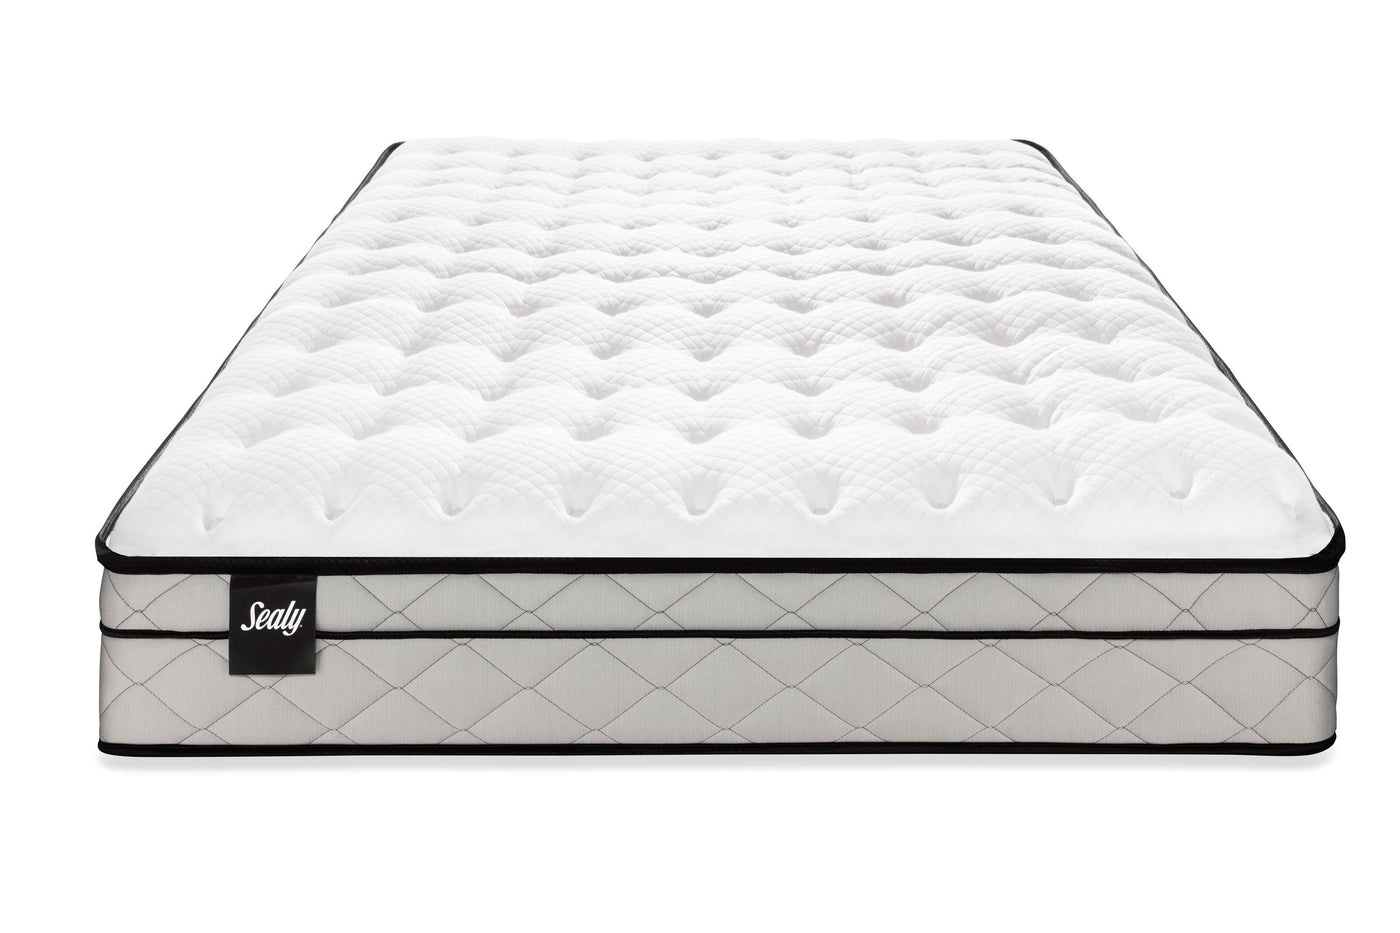 Sealy Shimmery Cushion Firm Twin Mattress